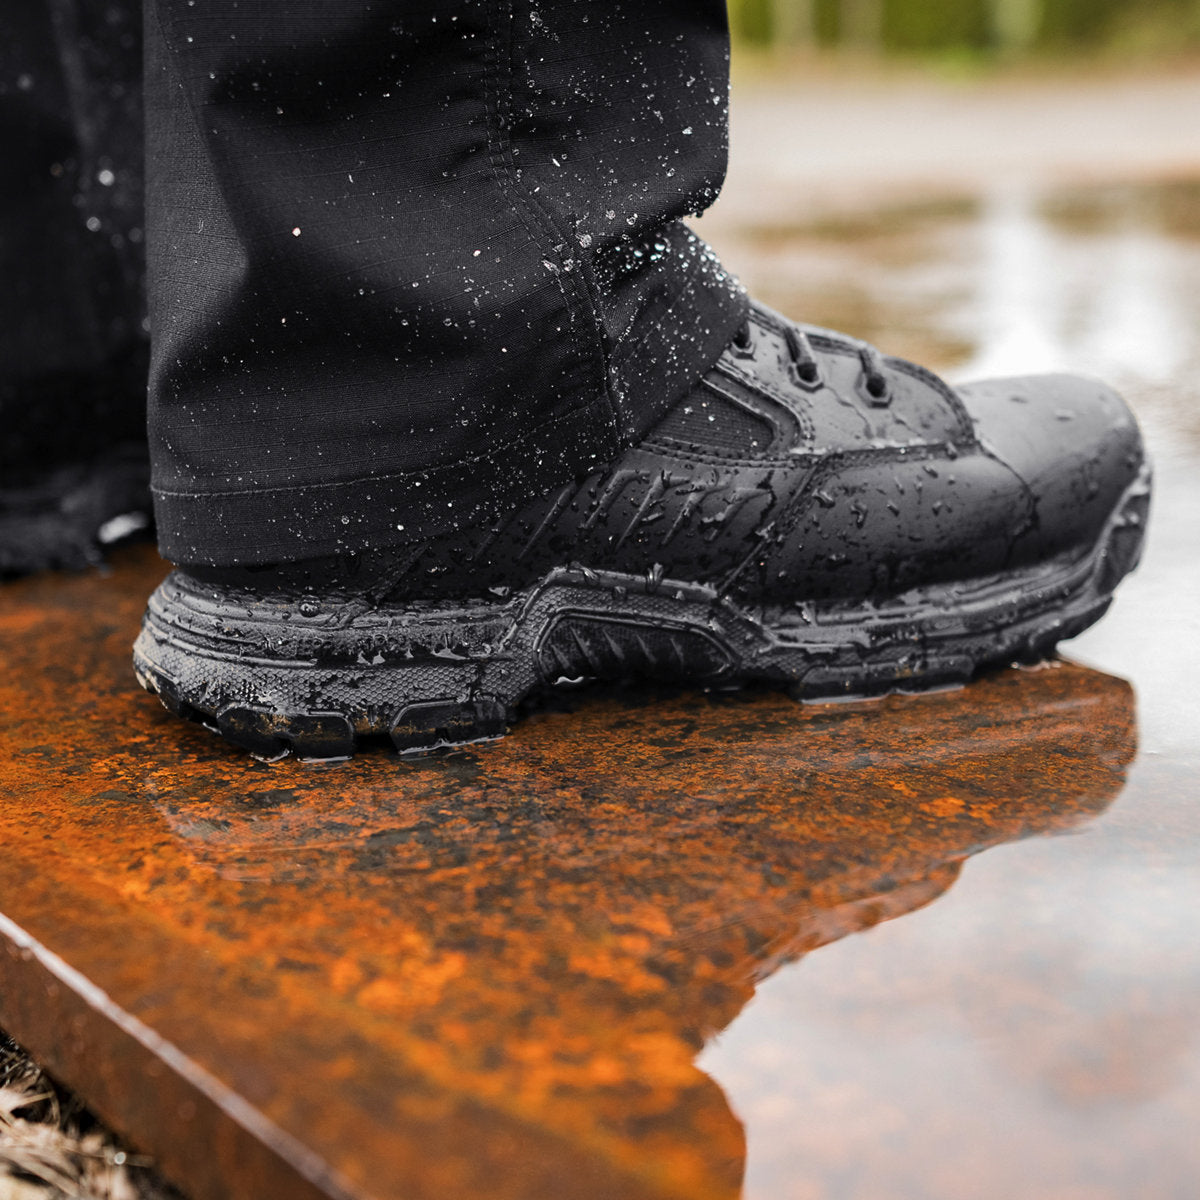 Strikerbolt 8" GTX Boot: Dependable protection and performance for all environments.